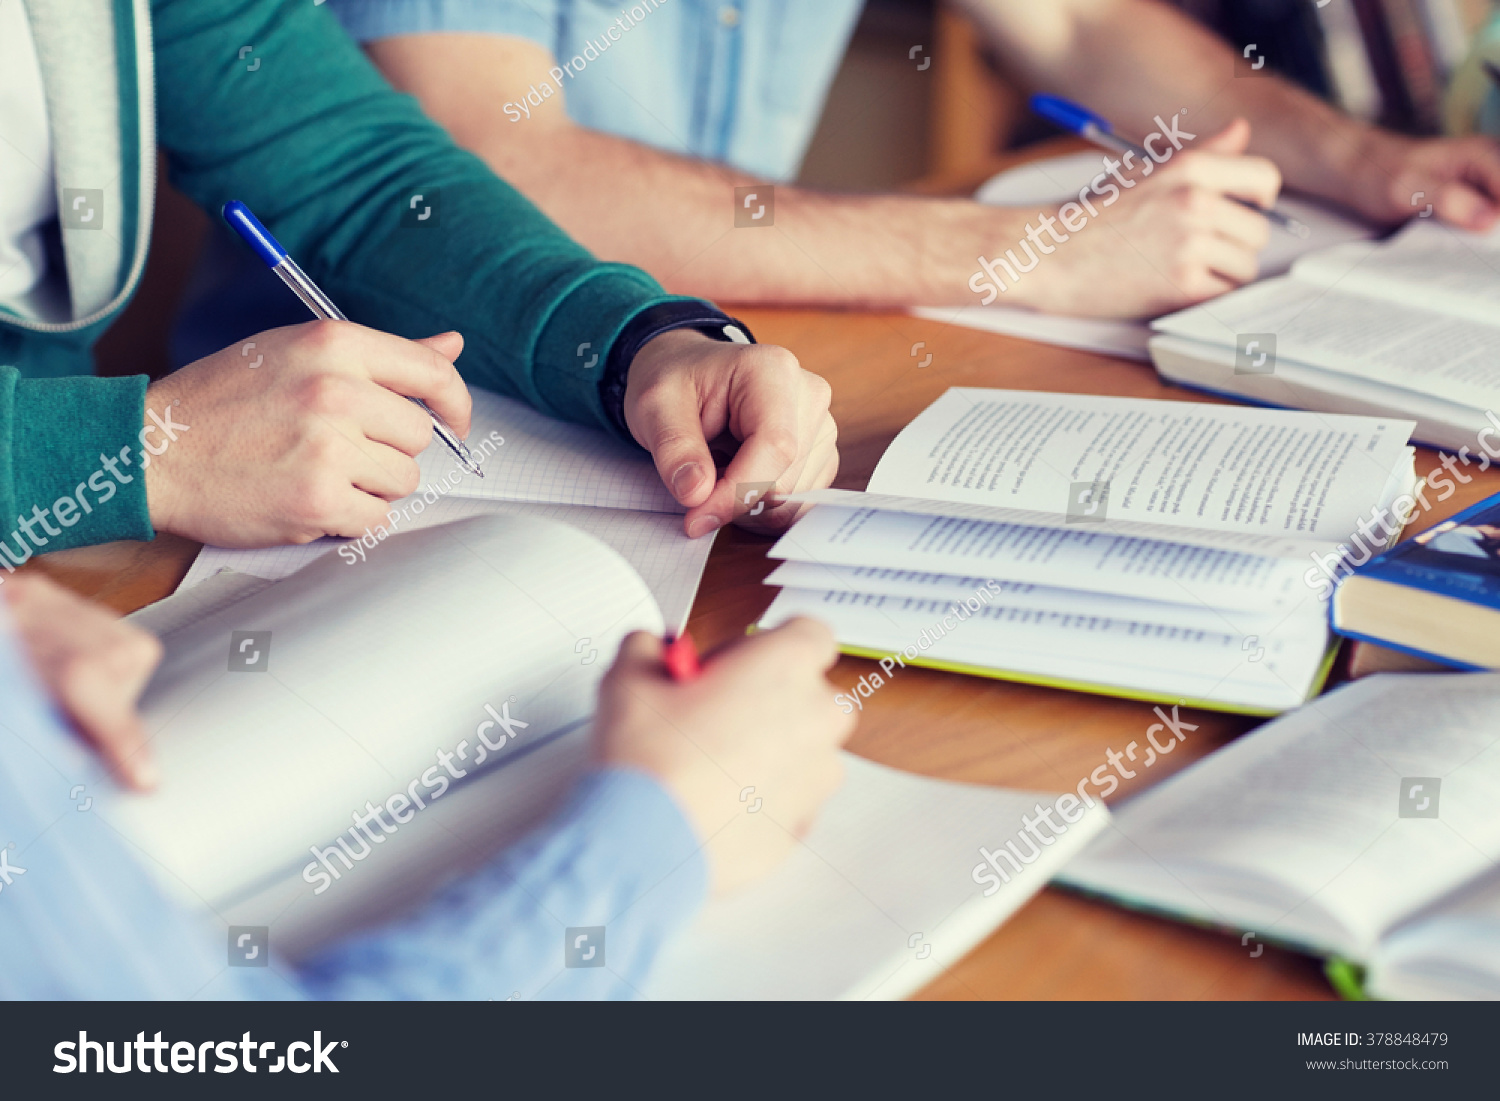 people, learning, education and school concept - close up of students hands with books or textbooks writing to notebooks #378848479